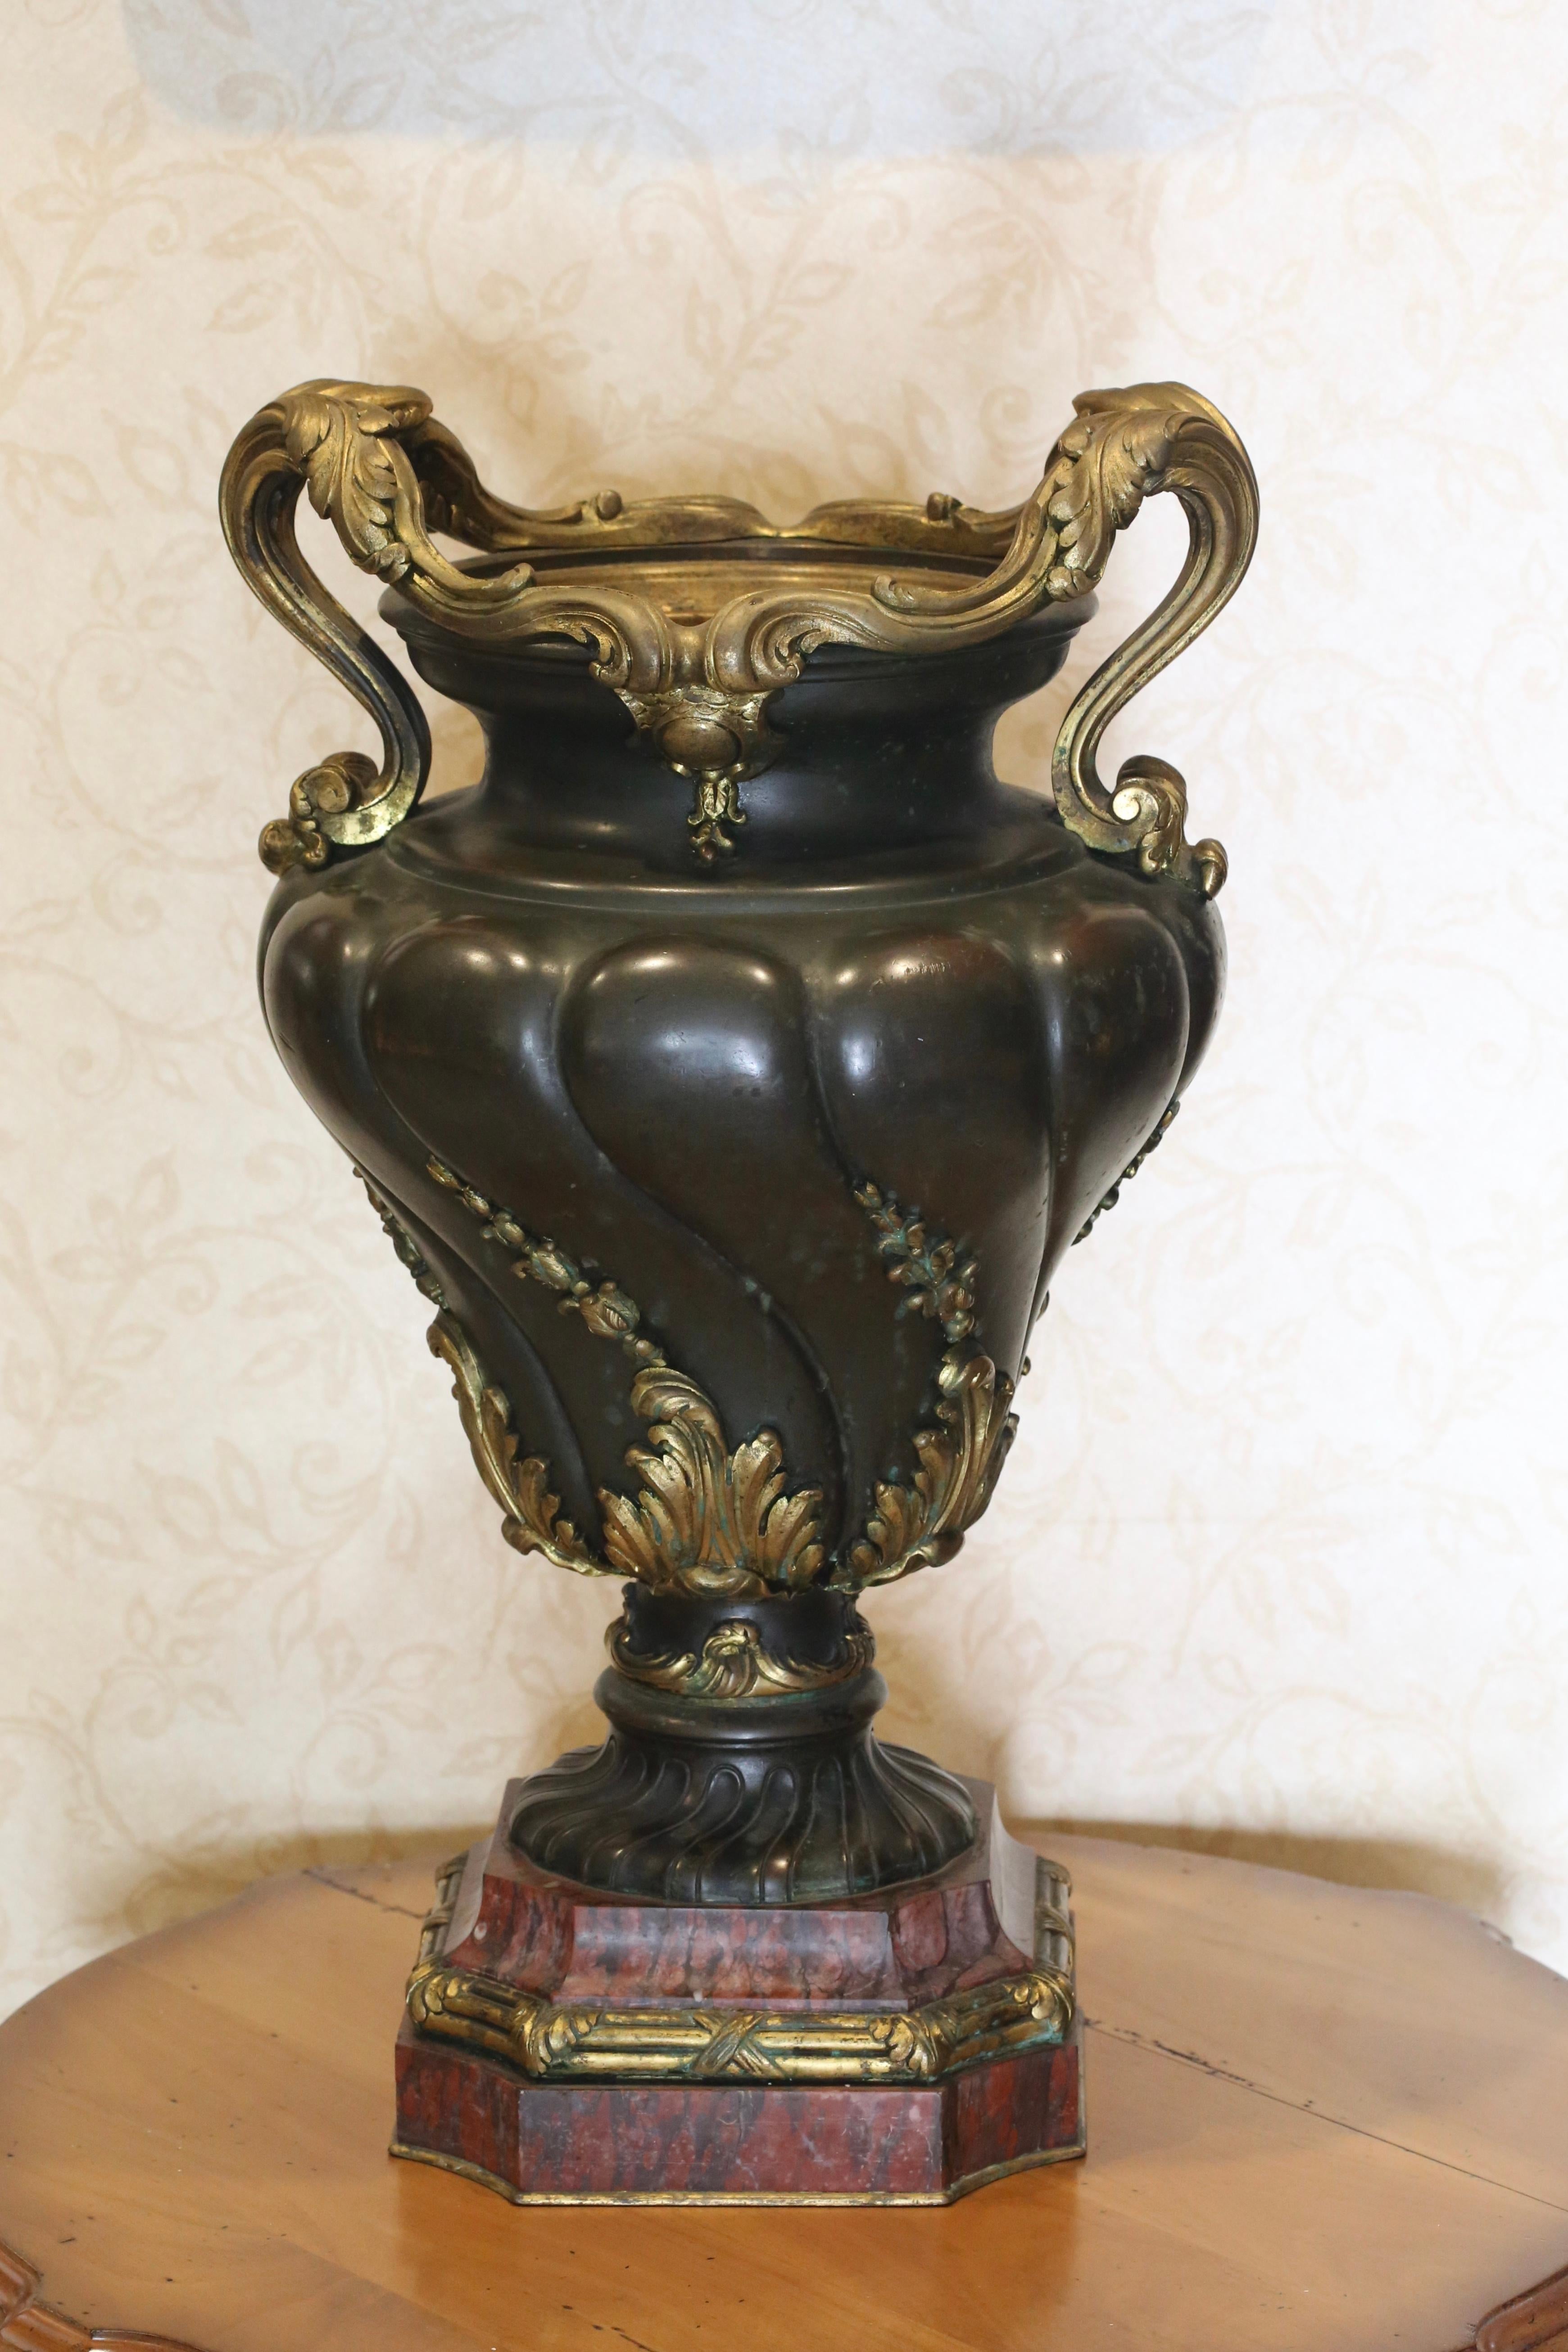 A very fine French gilt and patinated bronze urn, late 19th century

The foliate scroll handles above the spiral gadrooned body, on a shaped rouge griotte marble base

Auction record: London, South Kensington, Sale 6715, Christie's